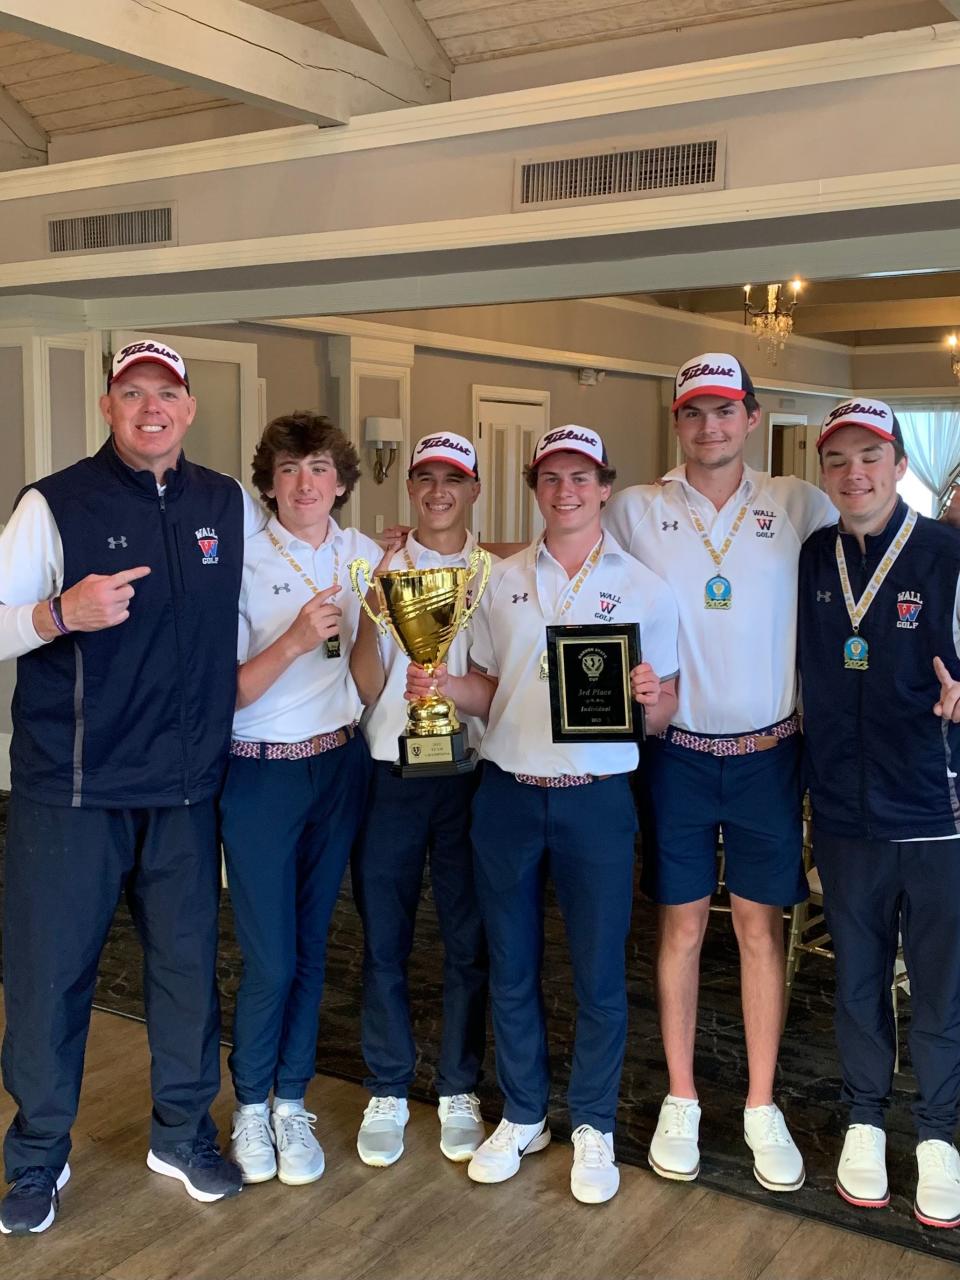 The Wall golf team after winning the Garden State Cup on April 5: (left to right) Coach Matt Stefanski; Boden Pepe; Charlie Cormey; Pat Scenna; Alex Menges; and Nolan McCarthy.